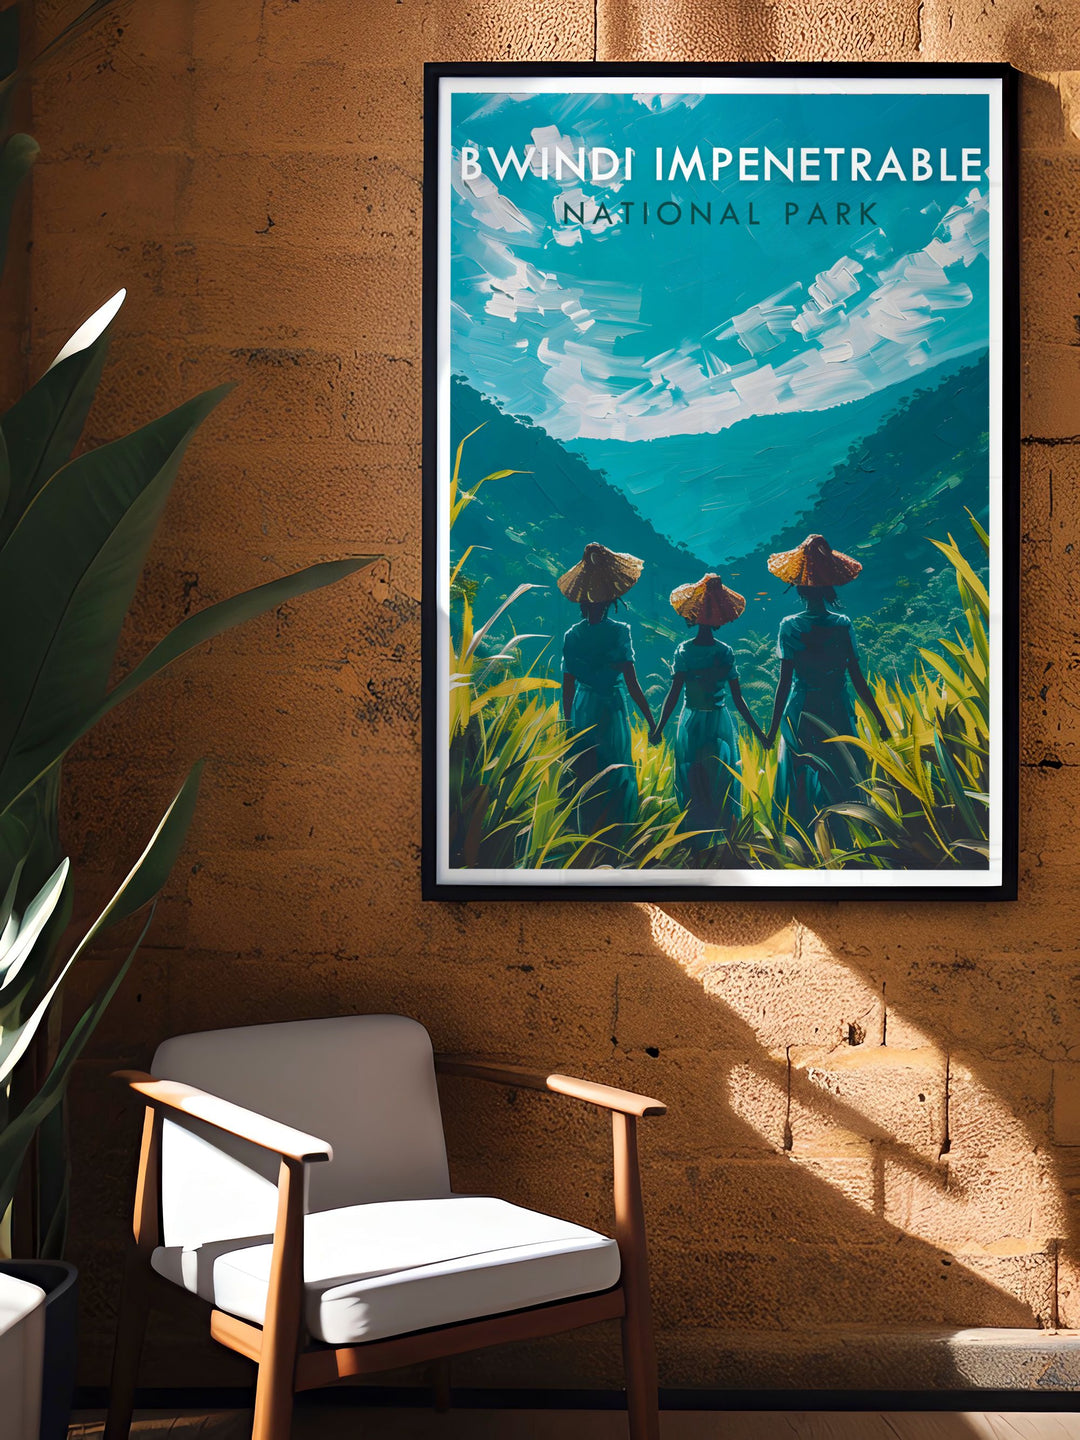 Featuring the rich culture and stunning natural scenery of Bwindi, this travel poster offers a glimpse into the heart of Uganda, ideal for those who appreciate both cultural and natural heritage.